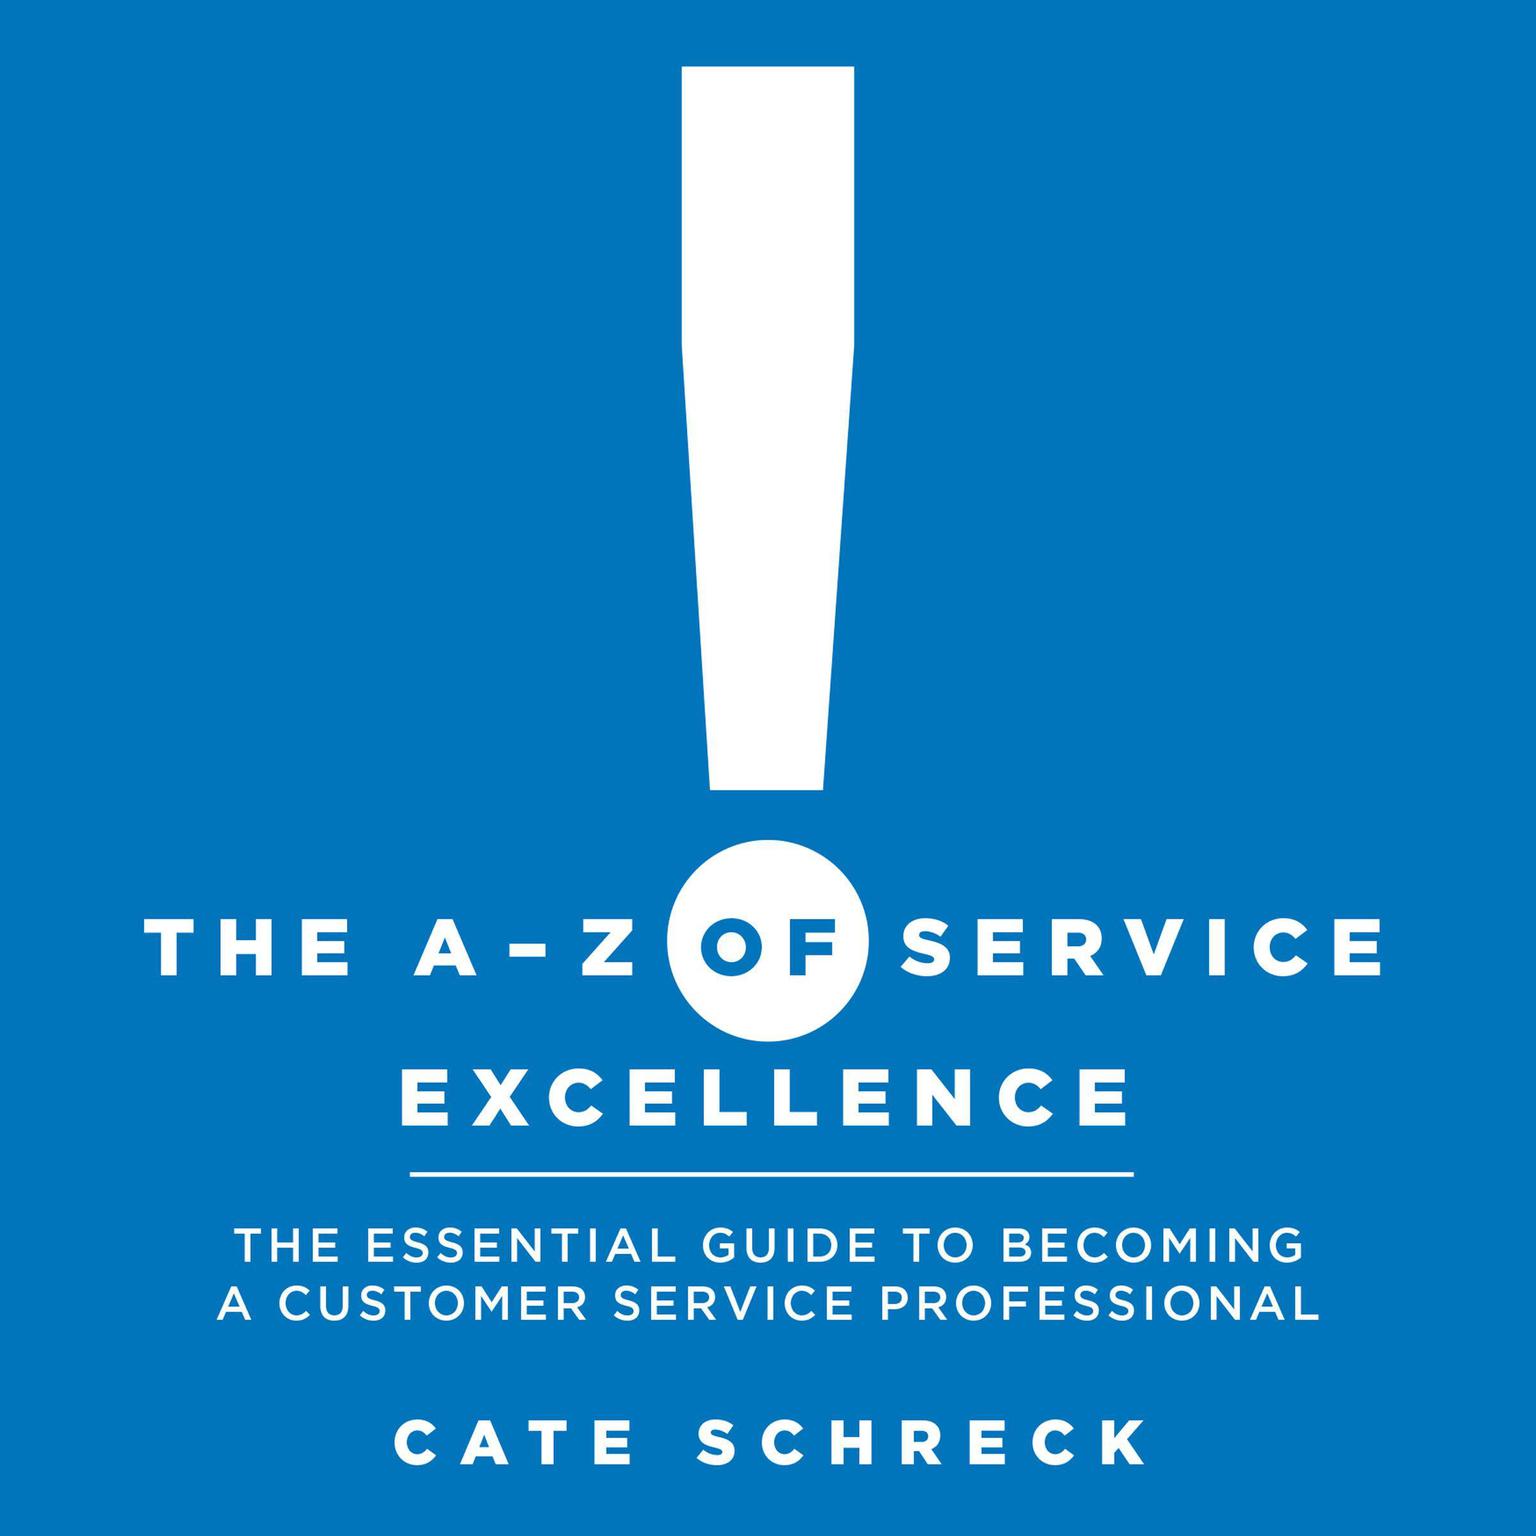 The A - Z of Service Excellence: The Essential Guide to Becoming a Customer Service Professional Audiobook, by Cate Schreck